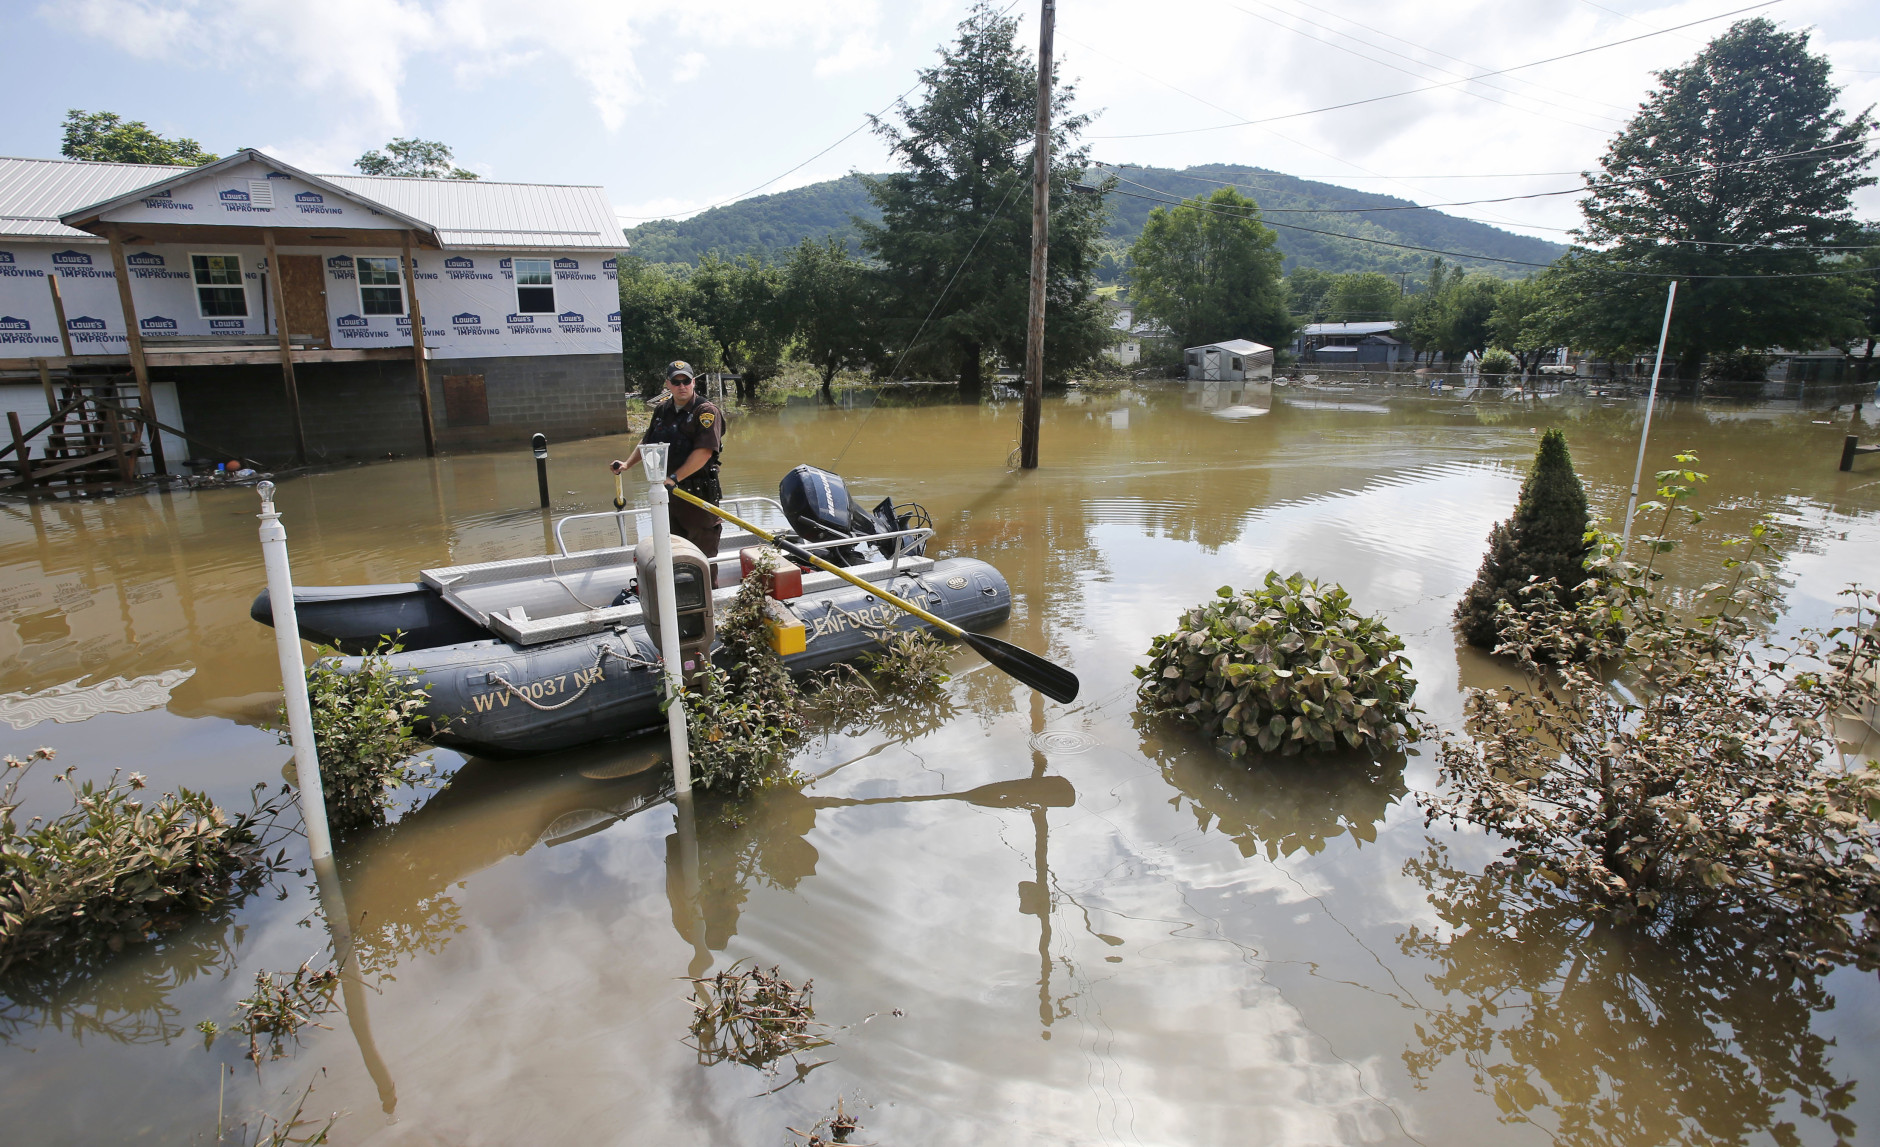 Lt. Dennis Feazell, of the West Virginia Department of Natural Resources, keeps his boat on station as he and a co-worker search flooded homes in Rainelle, W. Va., Saturday, June 25, 2016. Heavy rains that pummeled West Virginia left multiple people dead, and authorities said Saturday that an unknown number of people in the hardest-hit county remained unaccounted for. (AP Photo/Steve Helber)